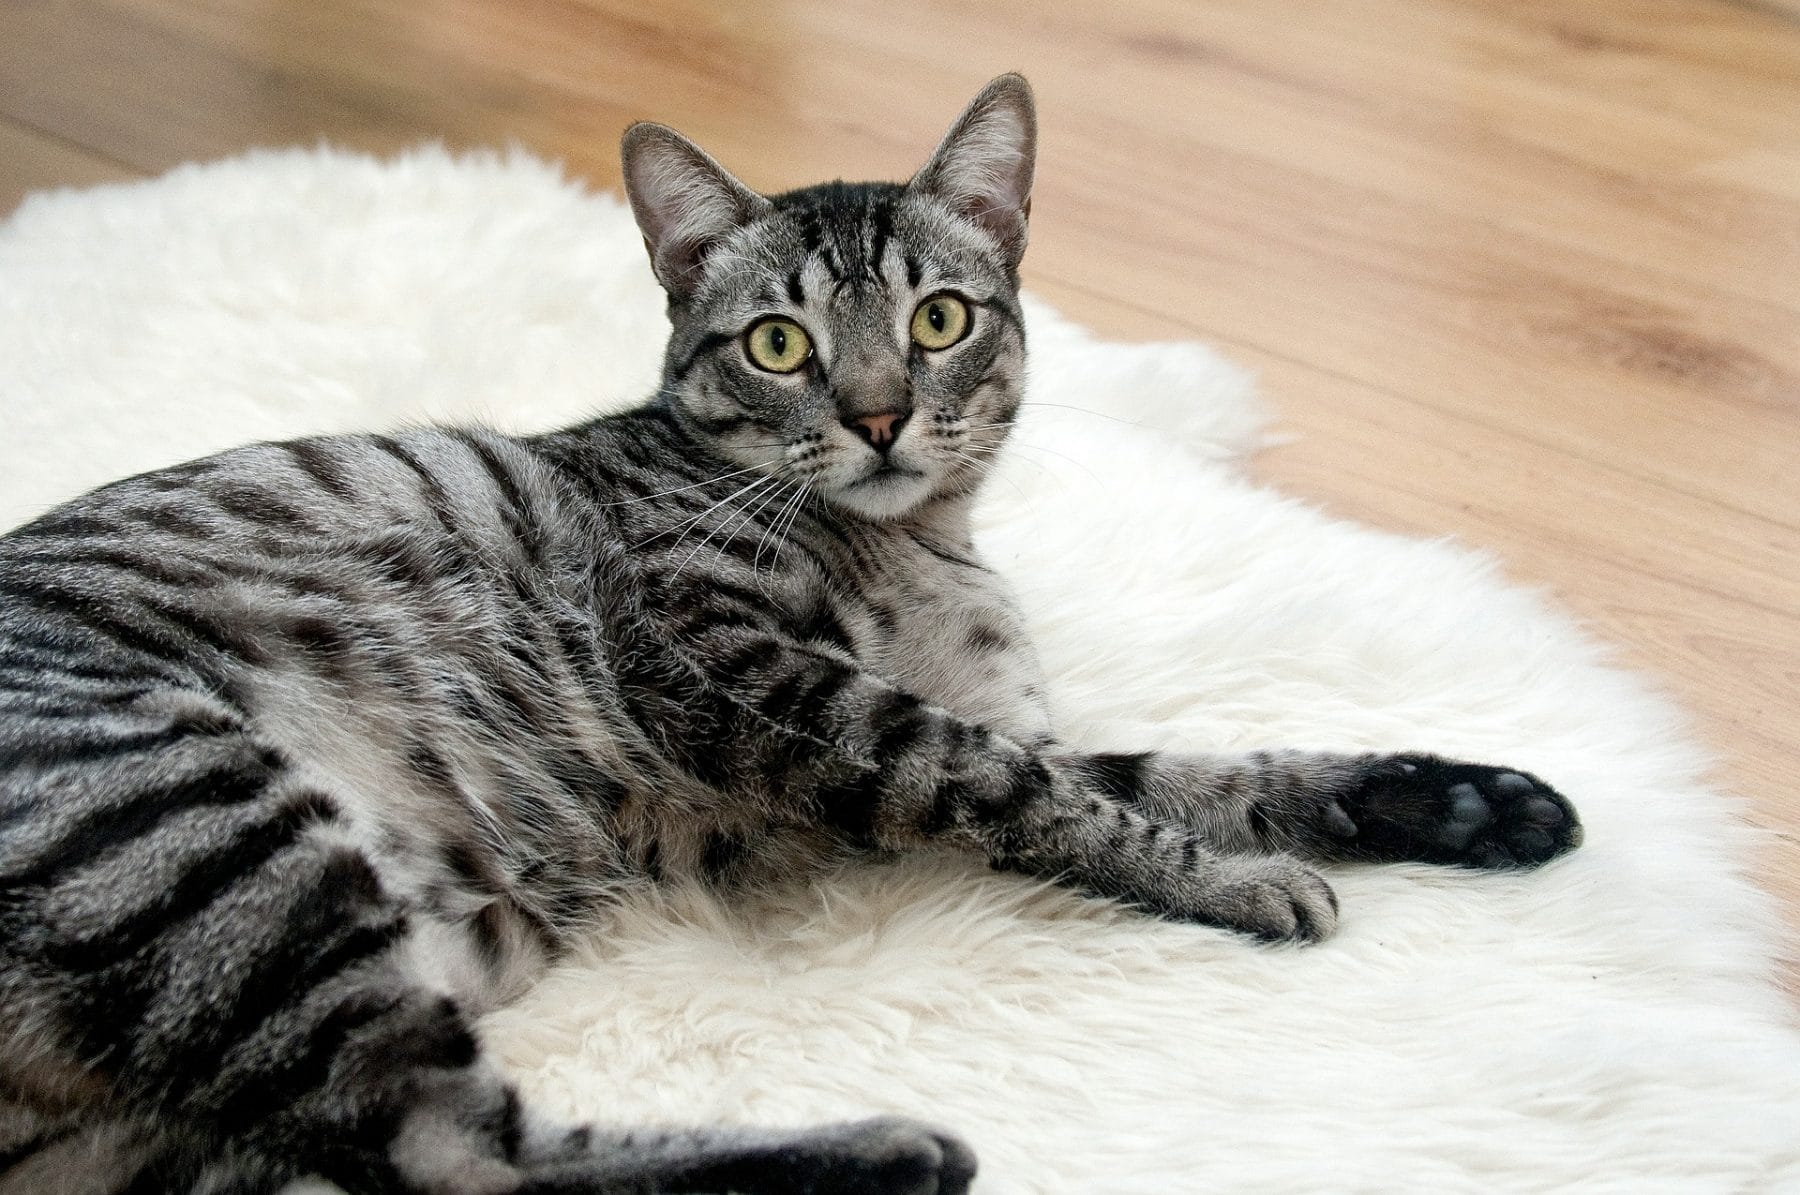 cat on a rug